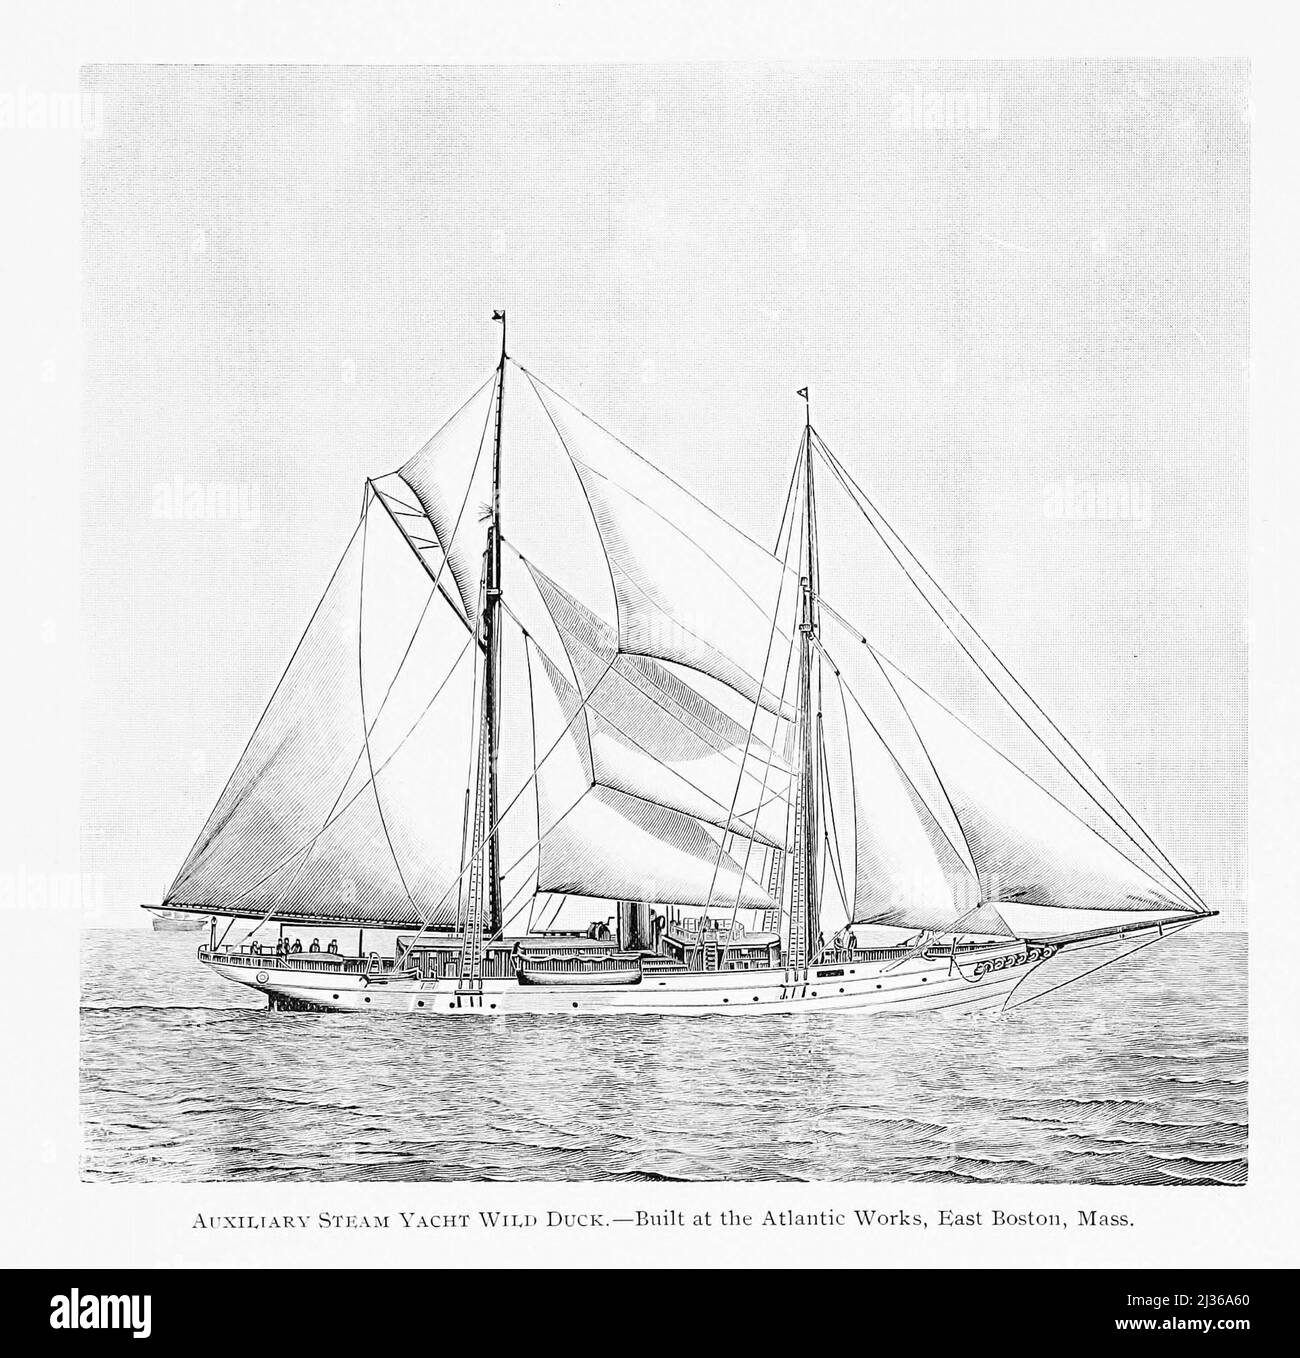 Auxiliary Steam Yacht Wild Duck. Built at the Atlantic Works, East Boston, Mass from the book ' Steam vessels & marine engines ' by G. Foster Howell, Publisher New York : American Shipbuilder 1896 Stock Photo